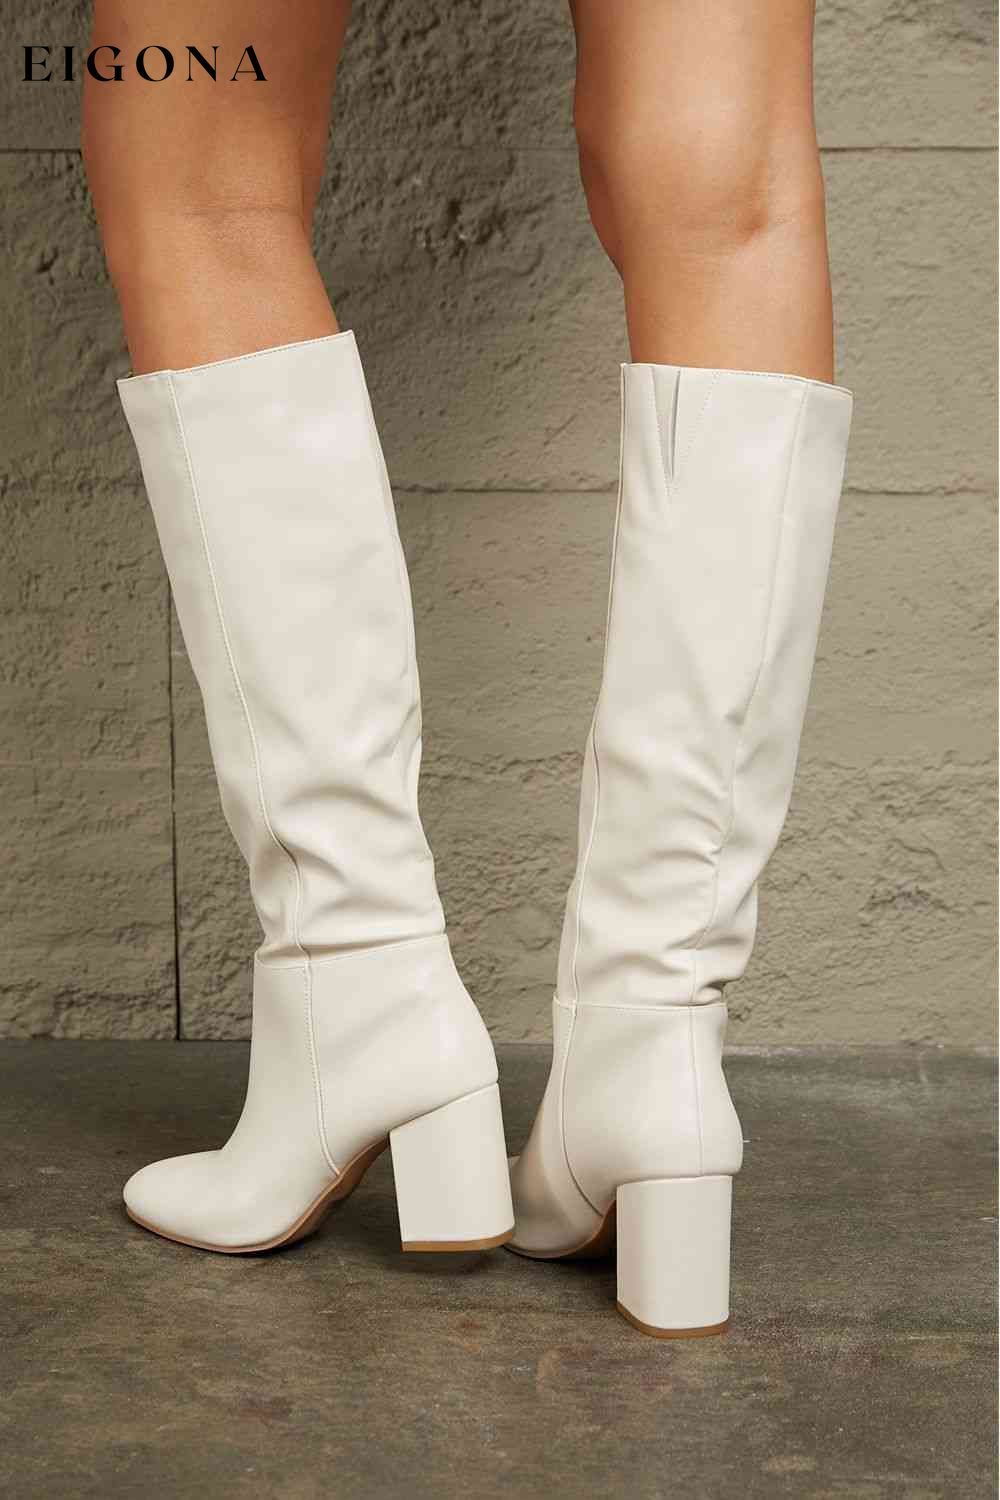 Block Heel Knee High Boots BFCM - Up to 70 Percent Off East Lion Corp Ship from USA shoes womens shoes